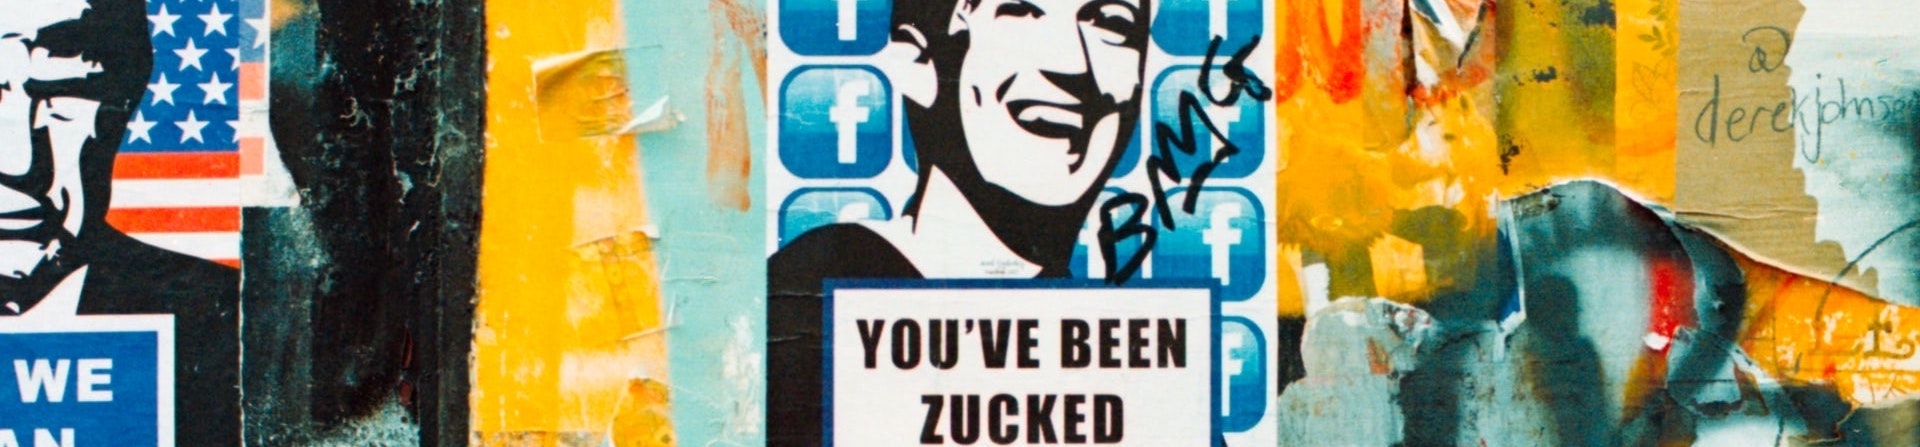 Research Poster: Facebook is Causing Detrimental Harm to Humanity